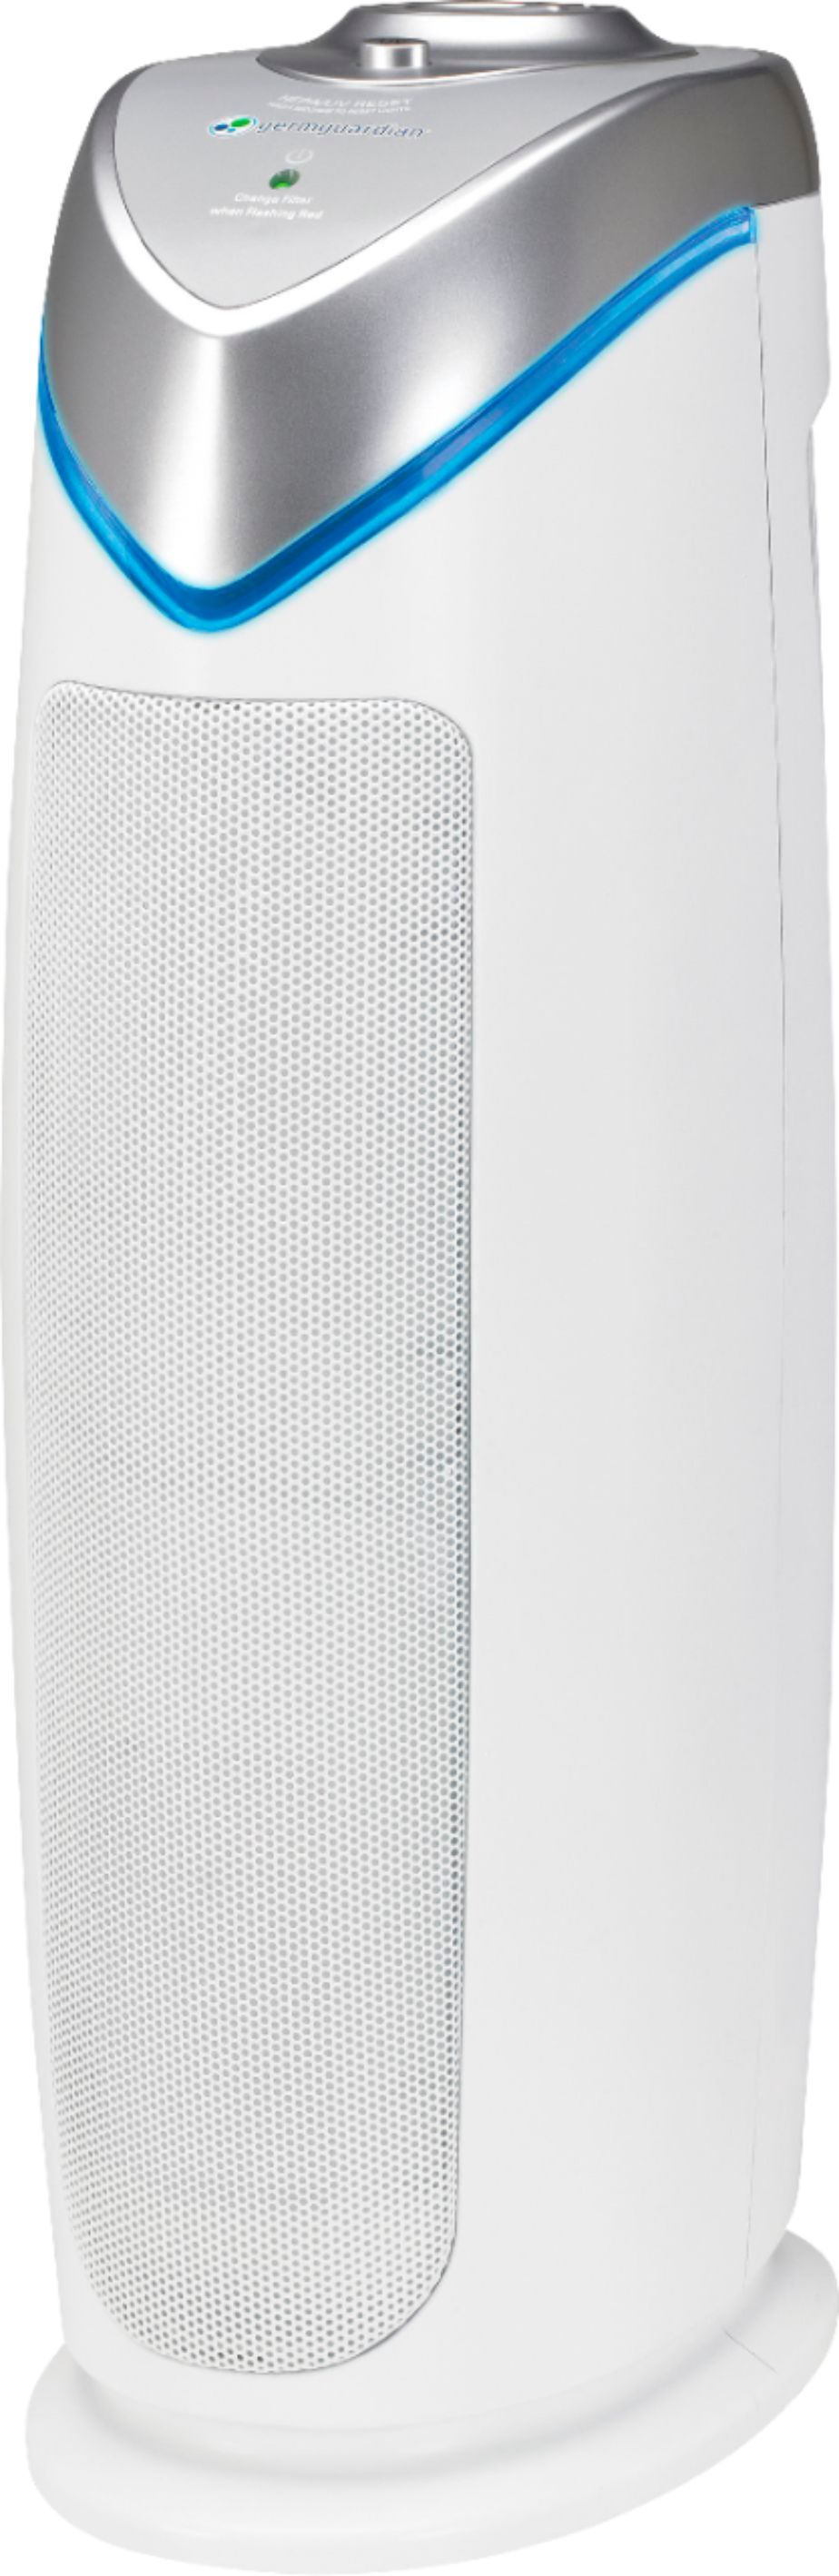 Angle View: Dyson - Pure Cool Link - TP02 - Smart Tower Air Purifier and Fan - White, silver